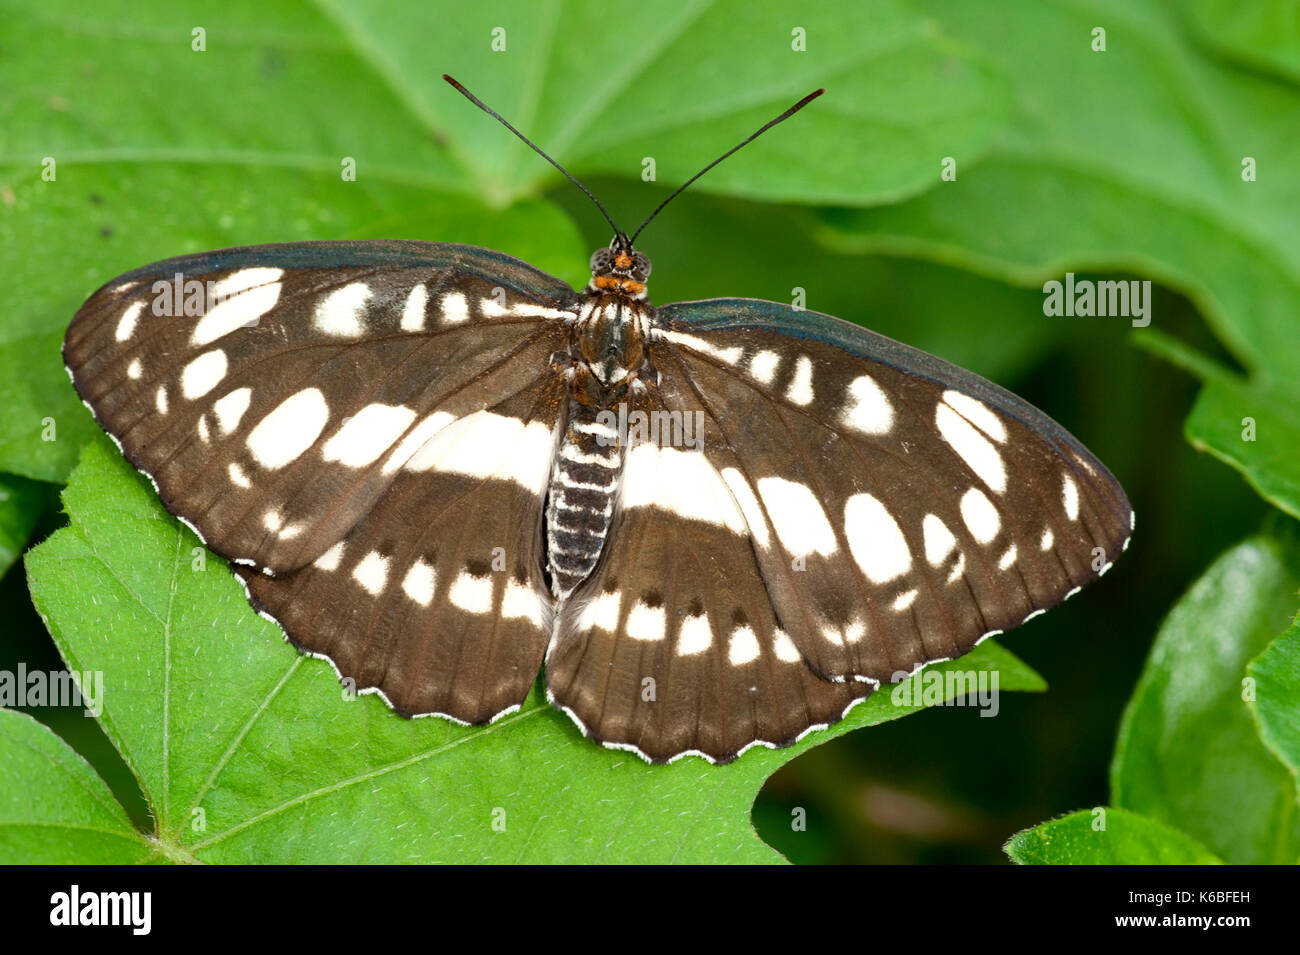 Sailor Butterfly, Neptis hylas, South Asia, black and white patterned wings open Stock Photo